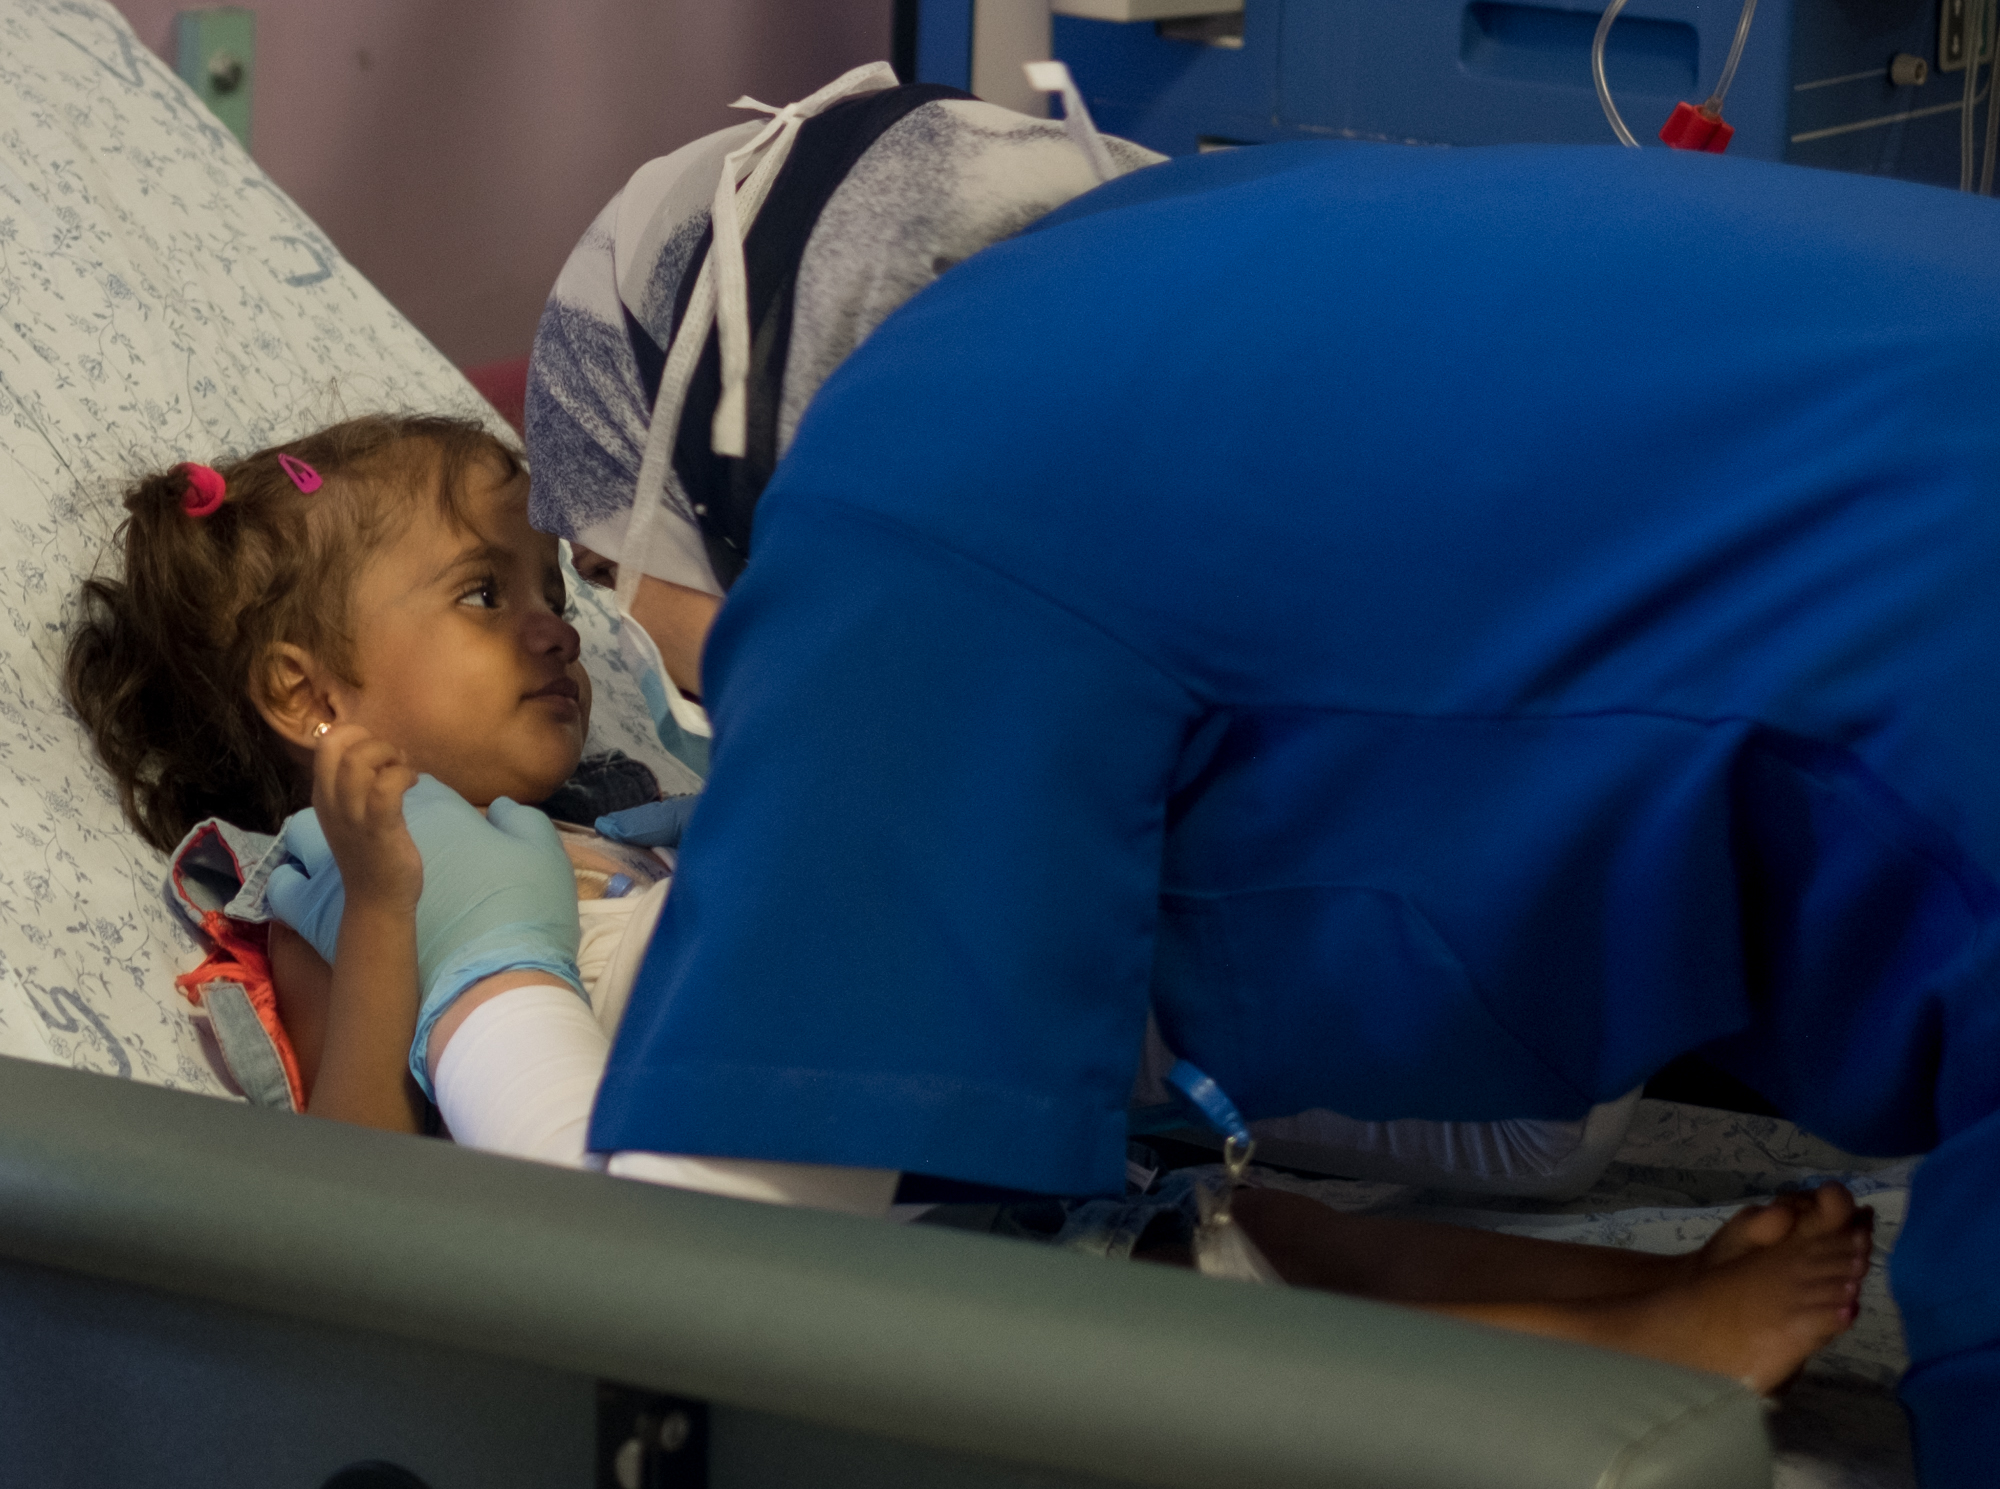 Ritaj, 5, a hemodialysis patient from Bethlehem in the West Bank, looks into her nurse's eyes while undergoing treatment at The Lutheran World Federation's Augusta Victoria Hospital (AVH) in East Jerusalem on Saturday morning, 8 September, 2018. AVH is the only hospital that offers pediatric hemodialysis for Palestinians from the West Bank and Gaza. Photo by Ben Gray / LWF